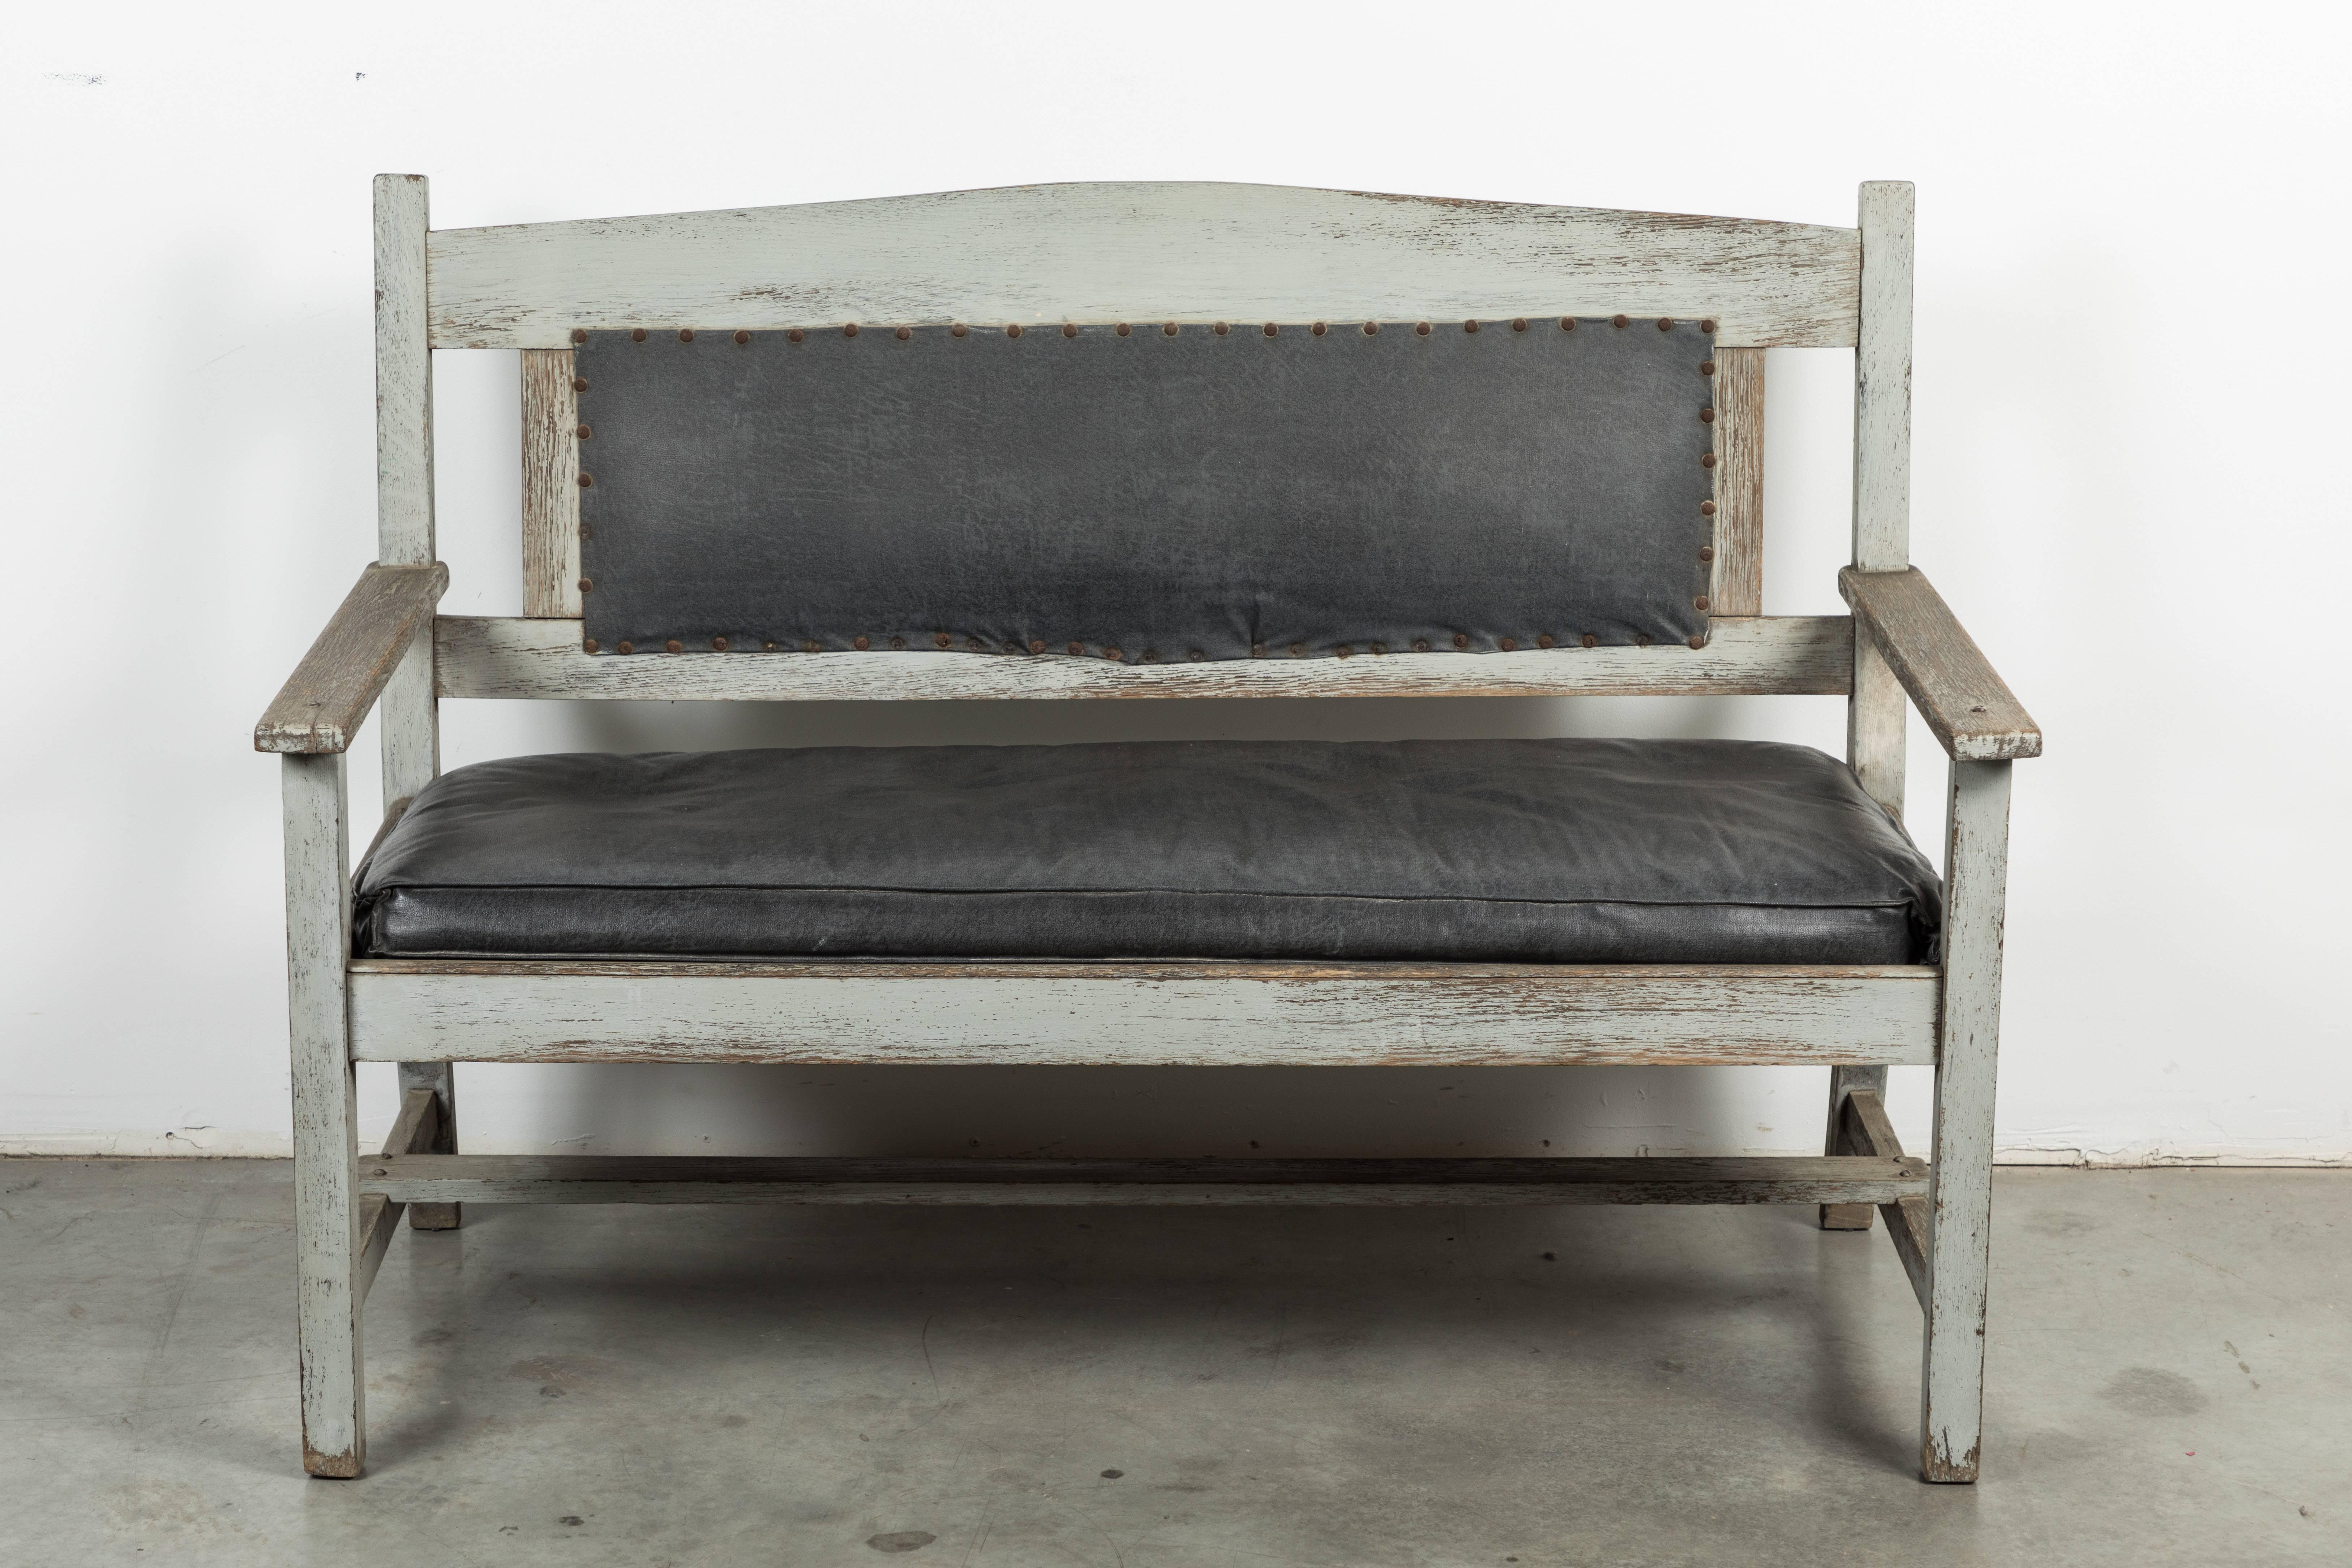 Great looking late 19th century railroad station bench found in the mid-west. Original grey paint on wood surface and very nicely aged leather seat and seat back. Solid and sturdy.